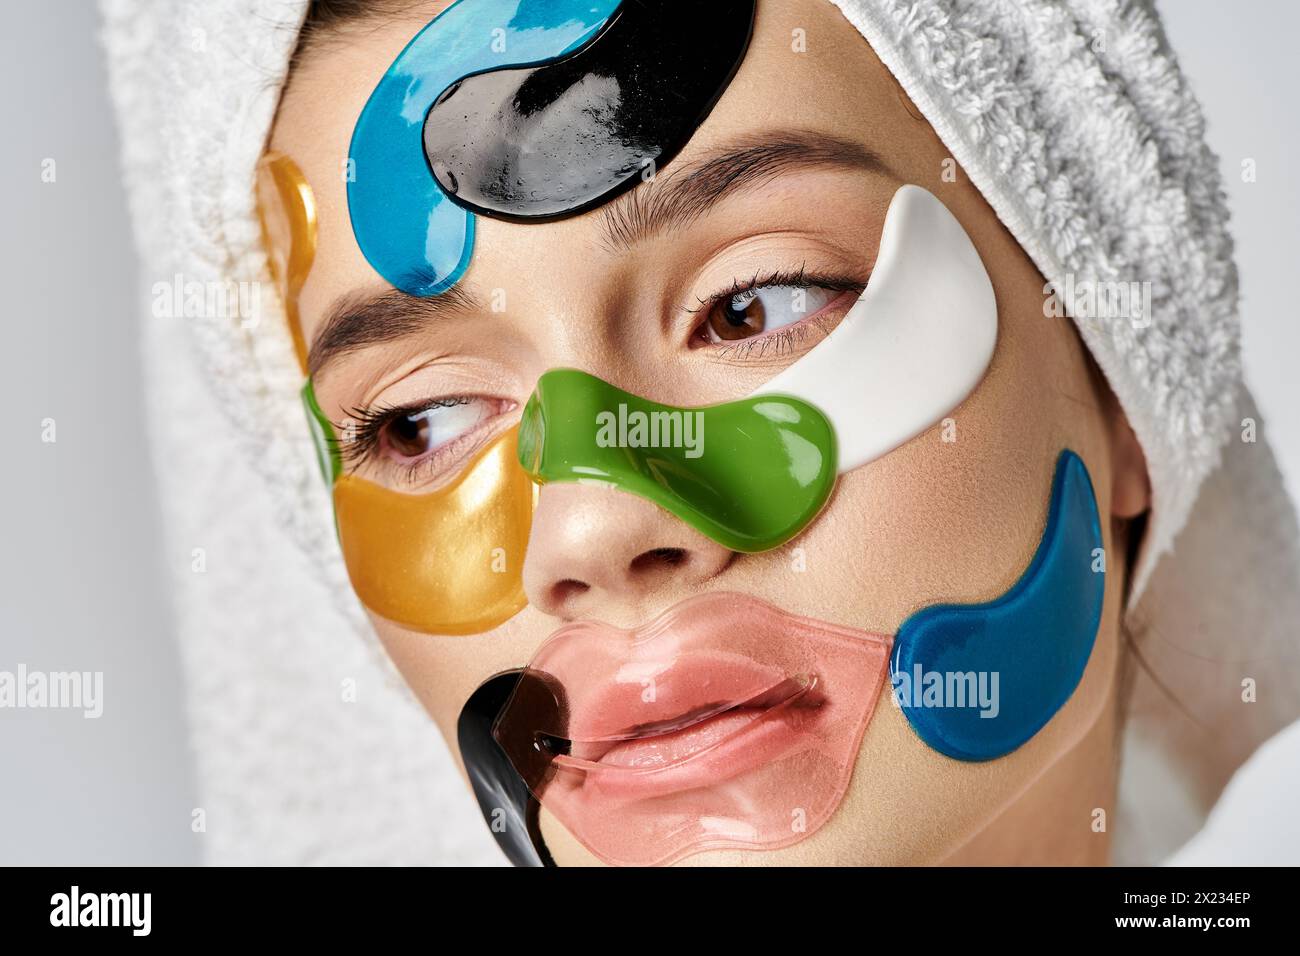 A young woman with eye patches on her face, towel wrapped on her head, exuding beauty and artistry. Stock Photo